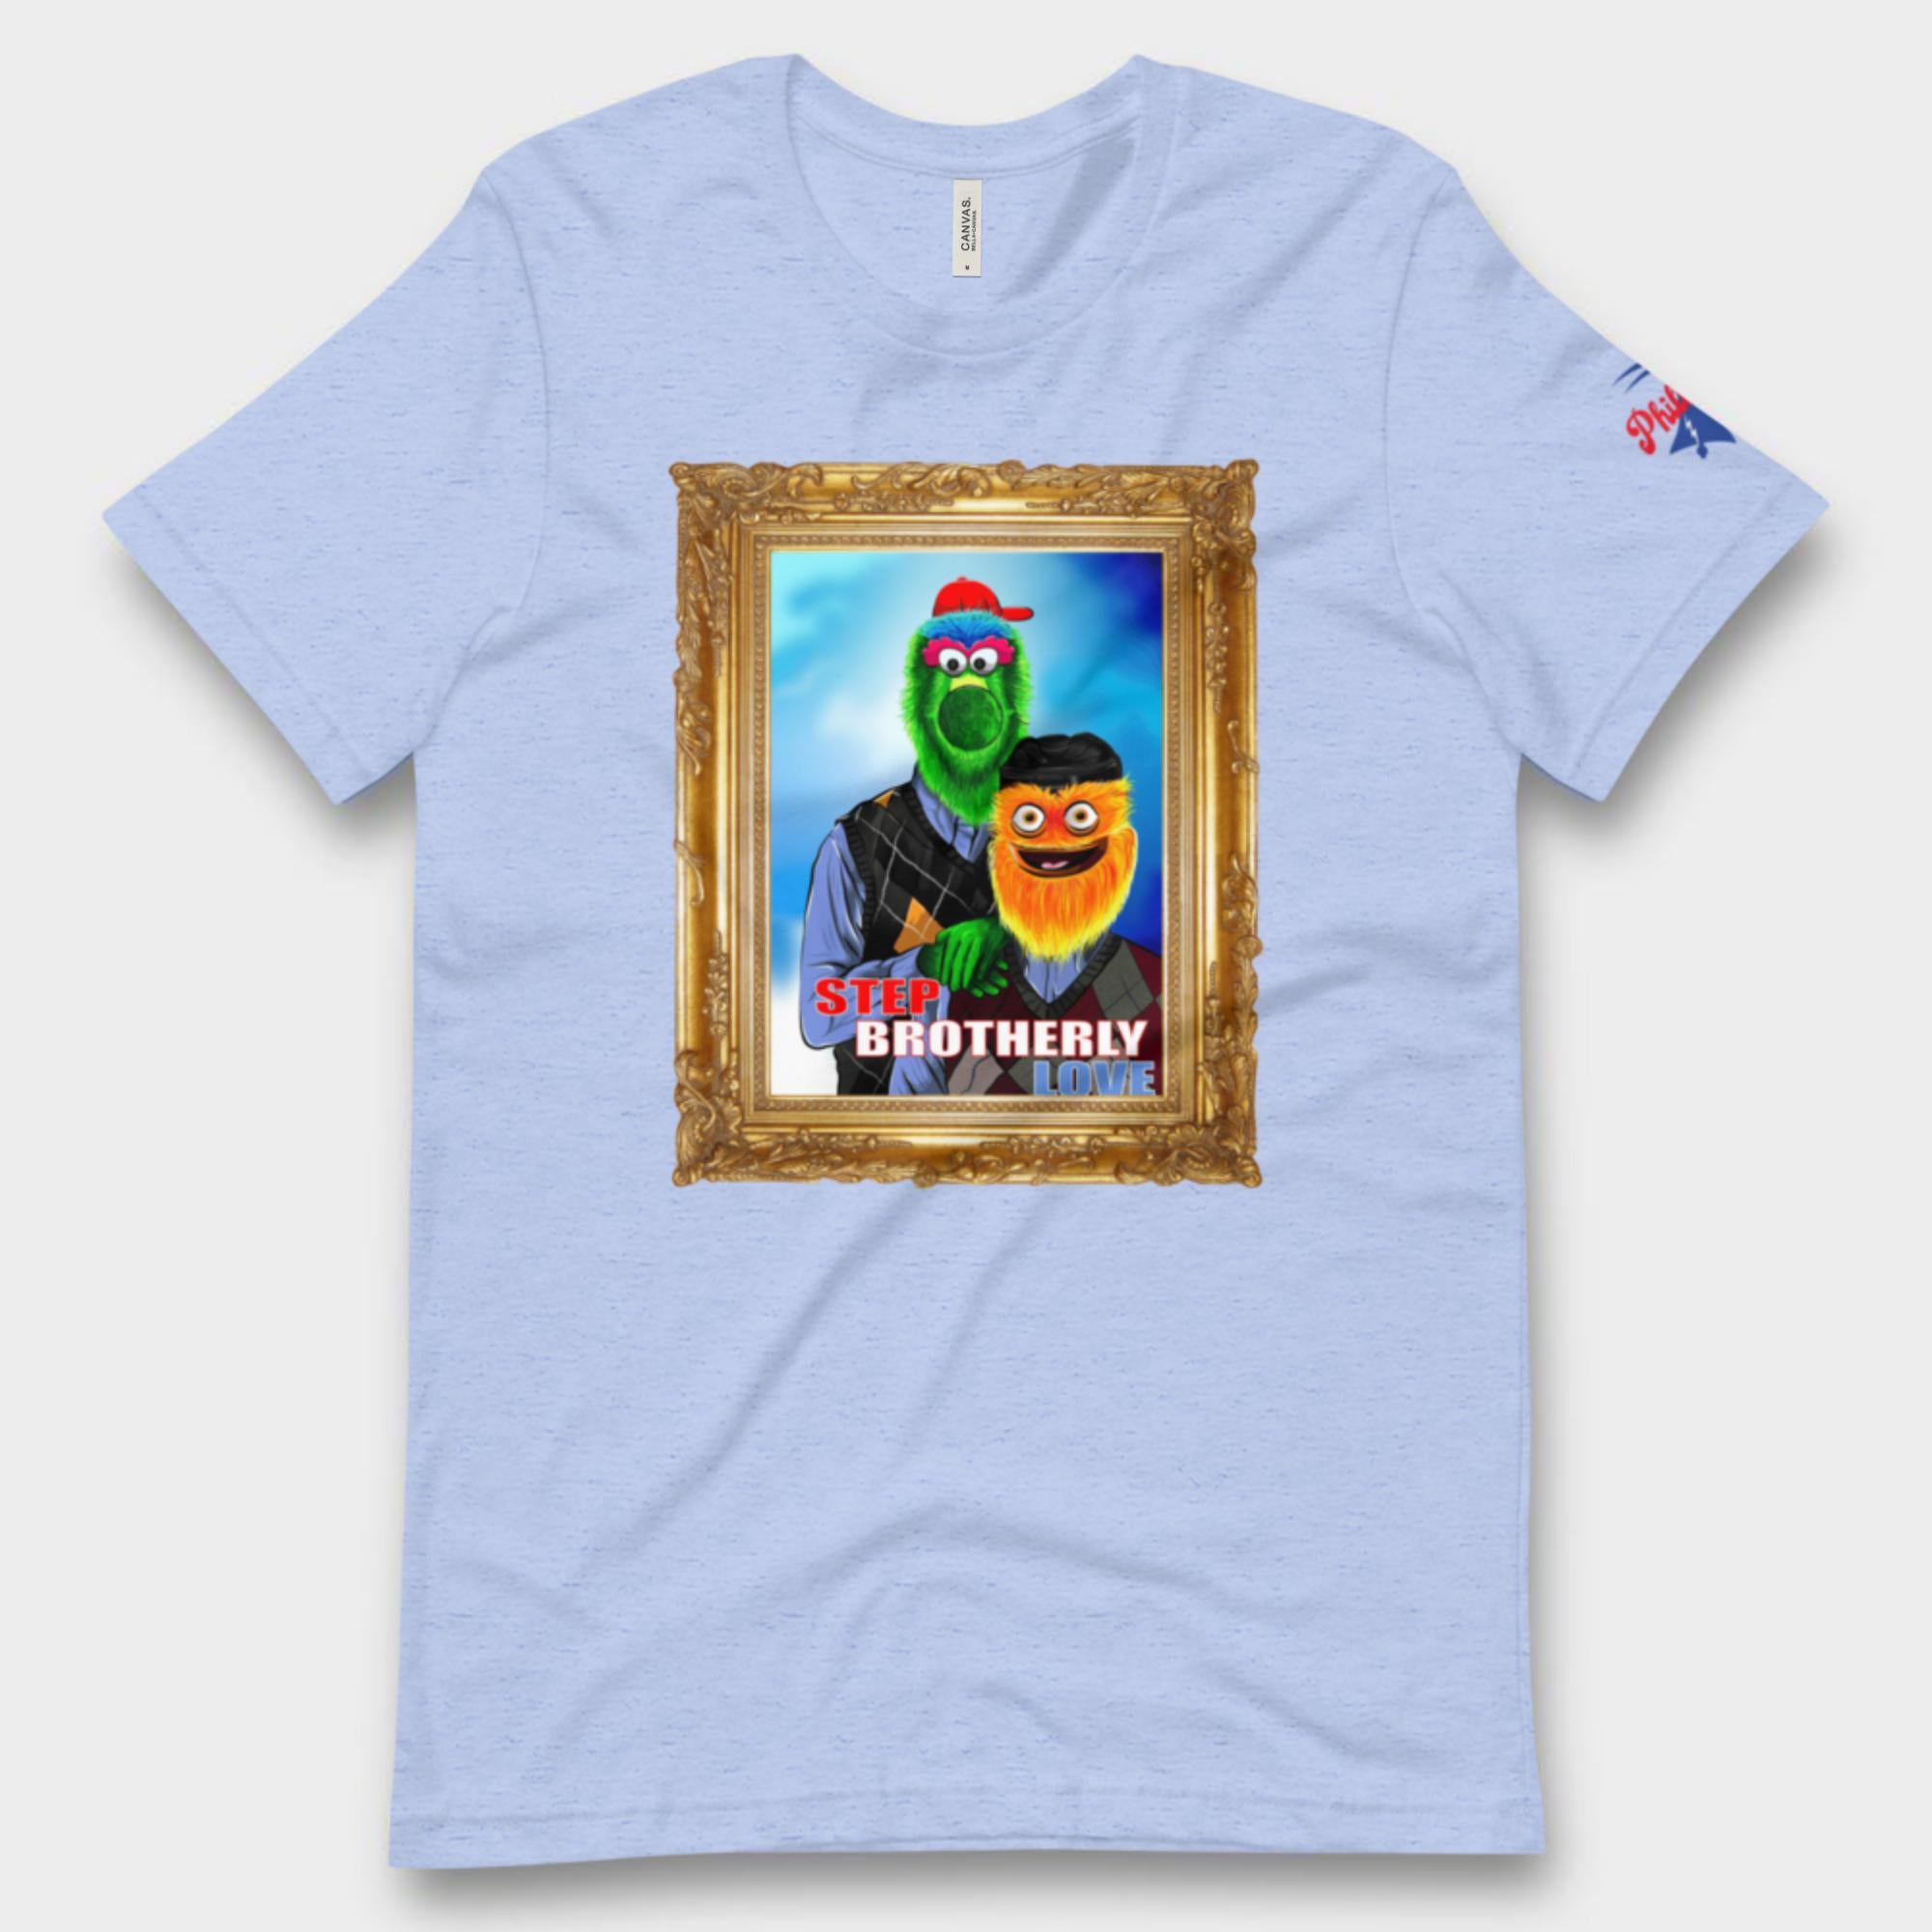 "Philly Fuzz Brothers" Tee